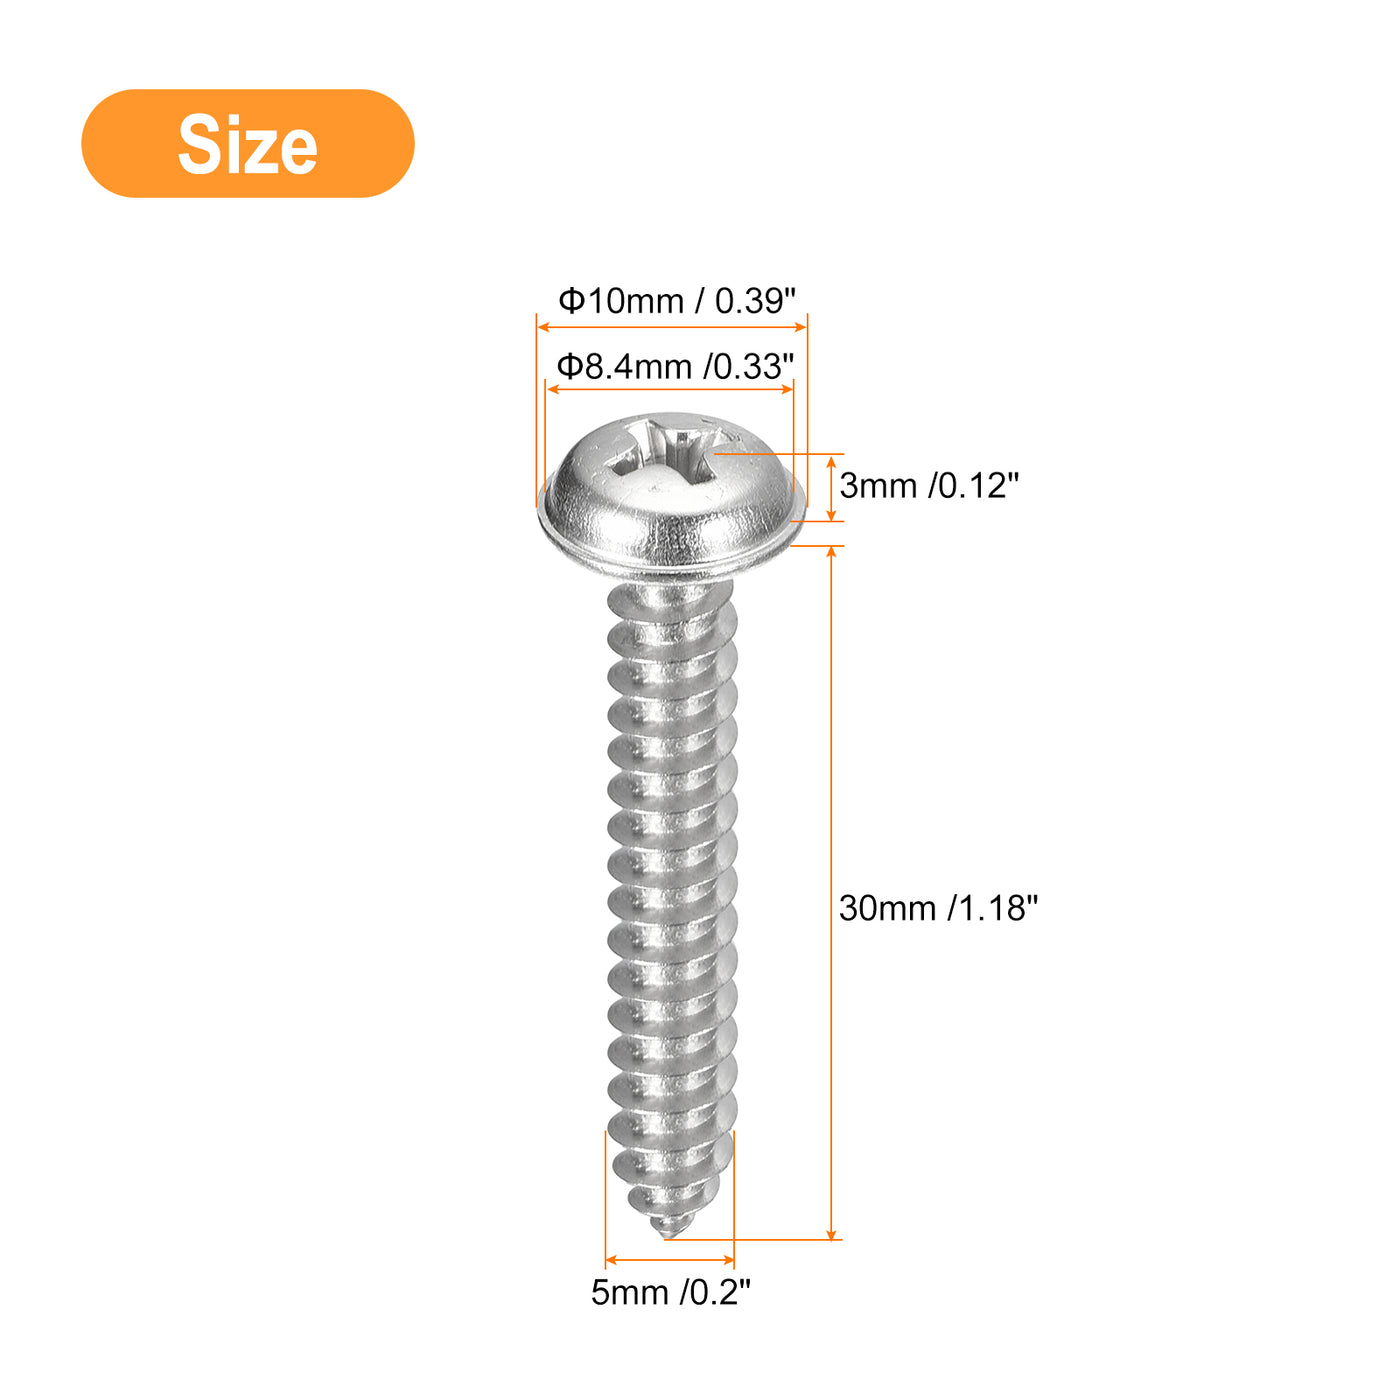 uxcell Uxcell ST5x30mm Phillips Pan Head Self-tapping Screw with Washer, 50pcs - 304 Stainless Steel Wood Screw Full Thread (Silver)